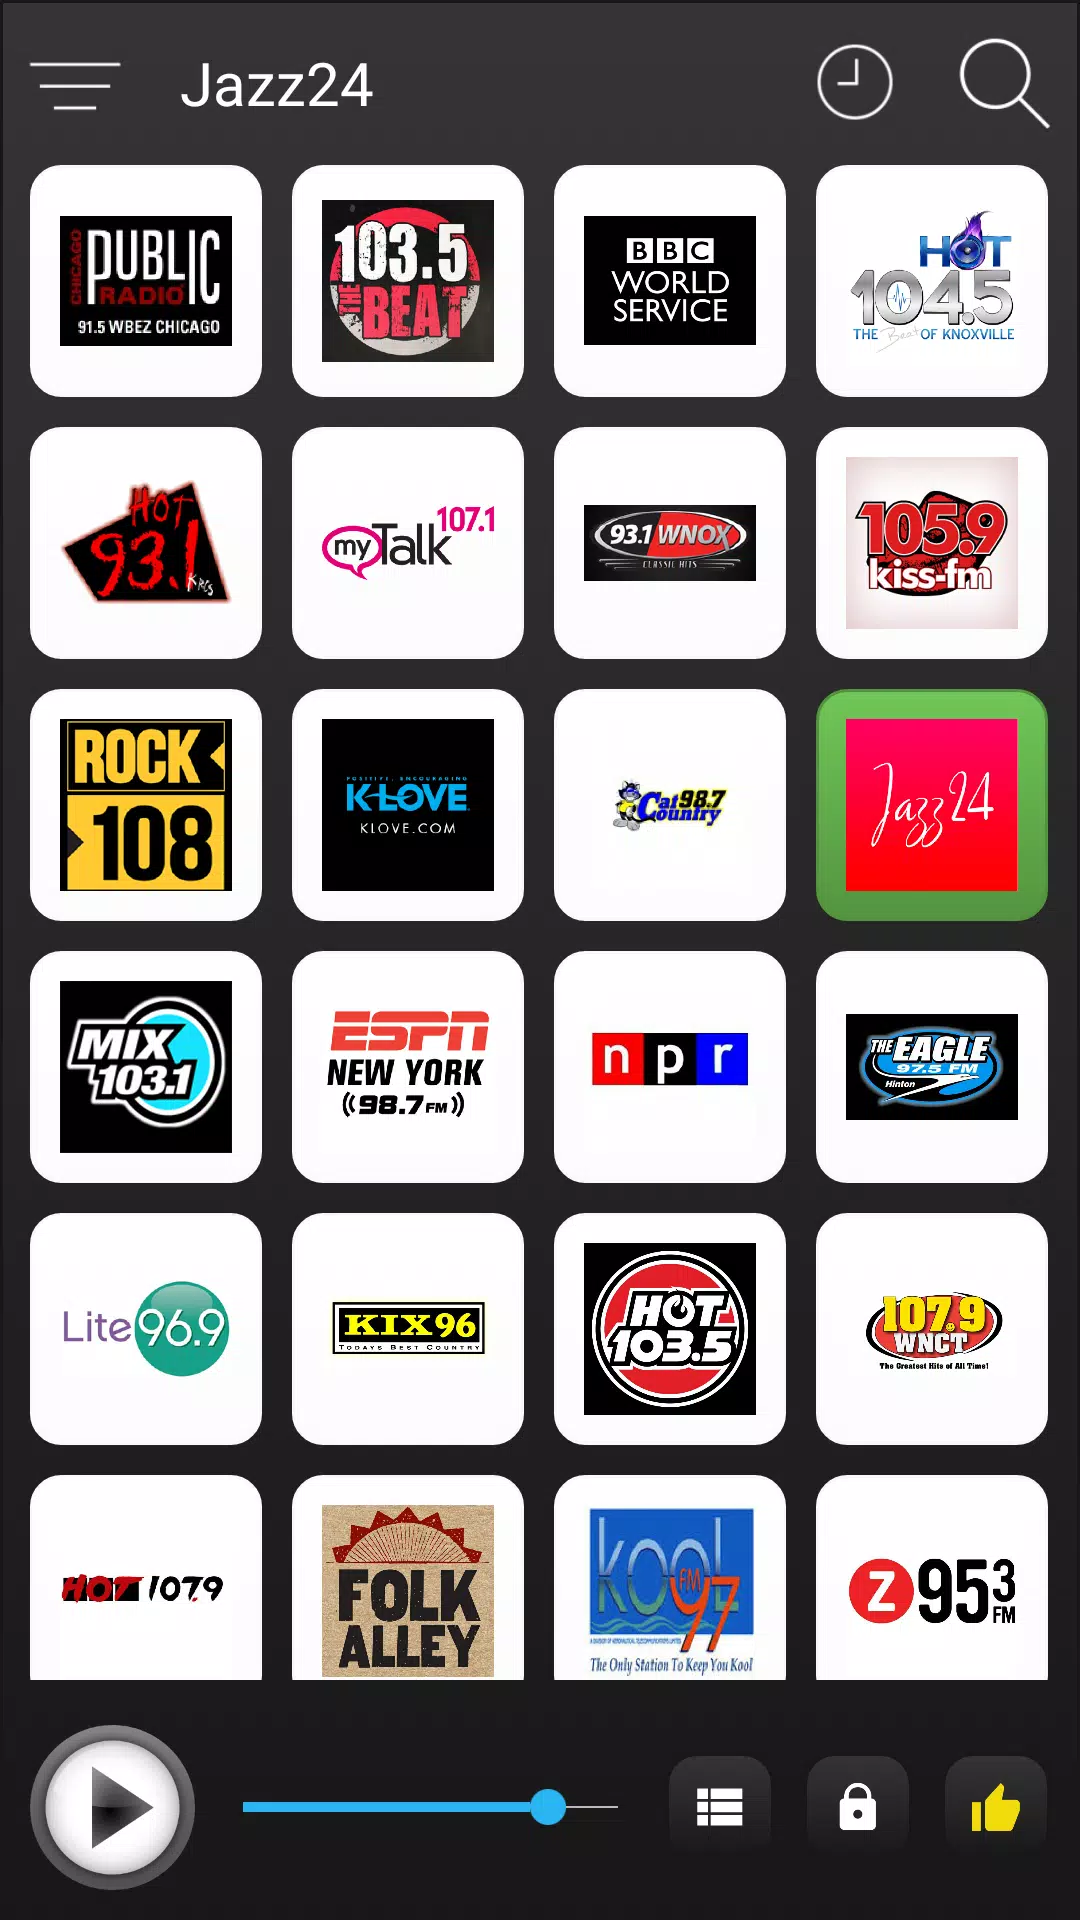 USA Radio Stations Online - America FM AM Music for Android - APK Download